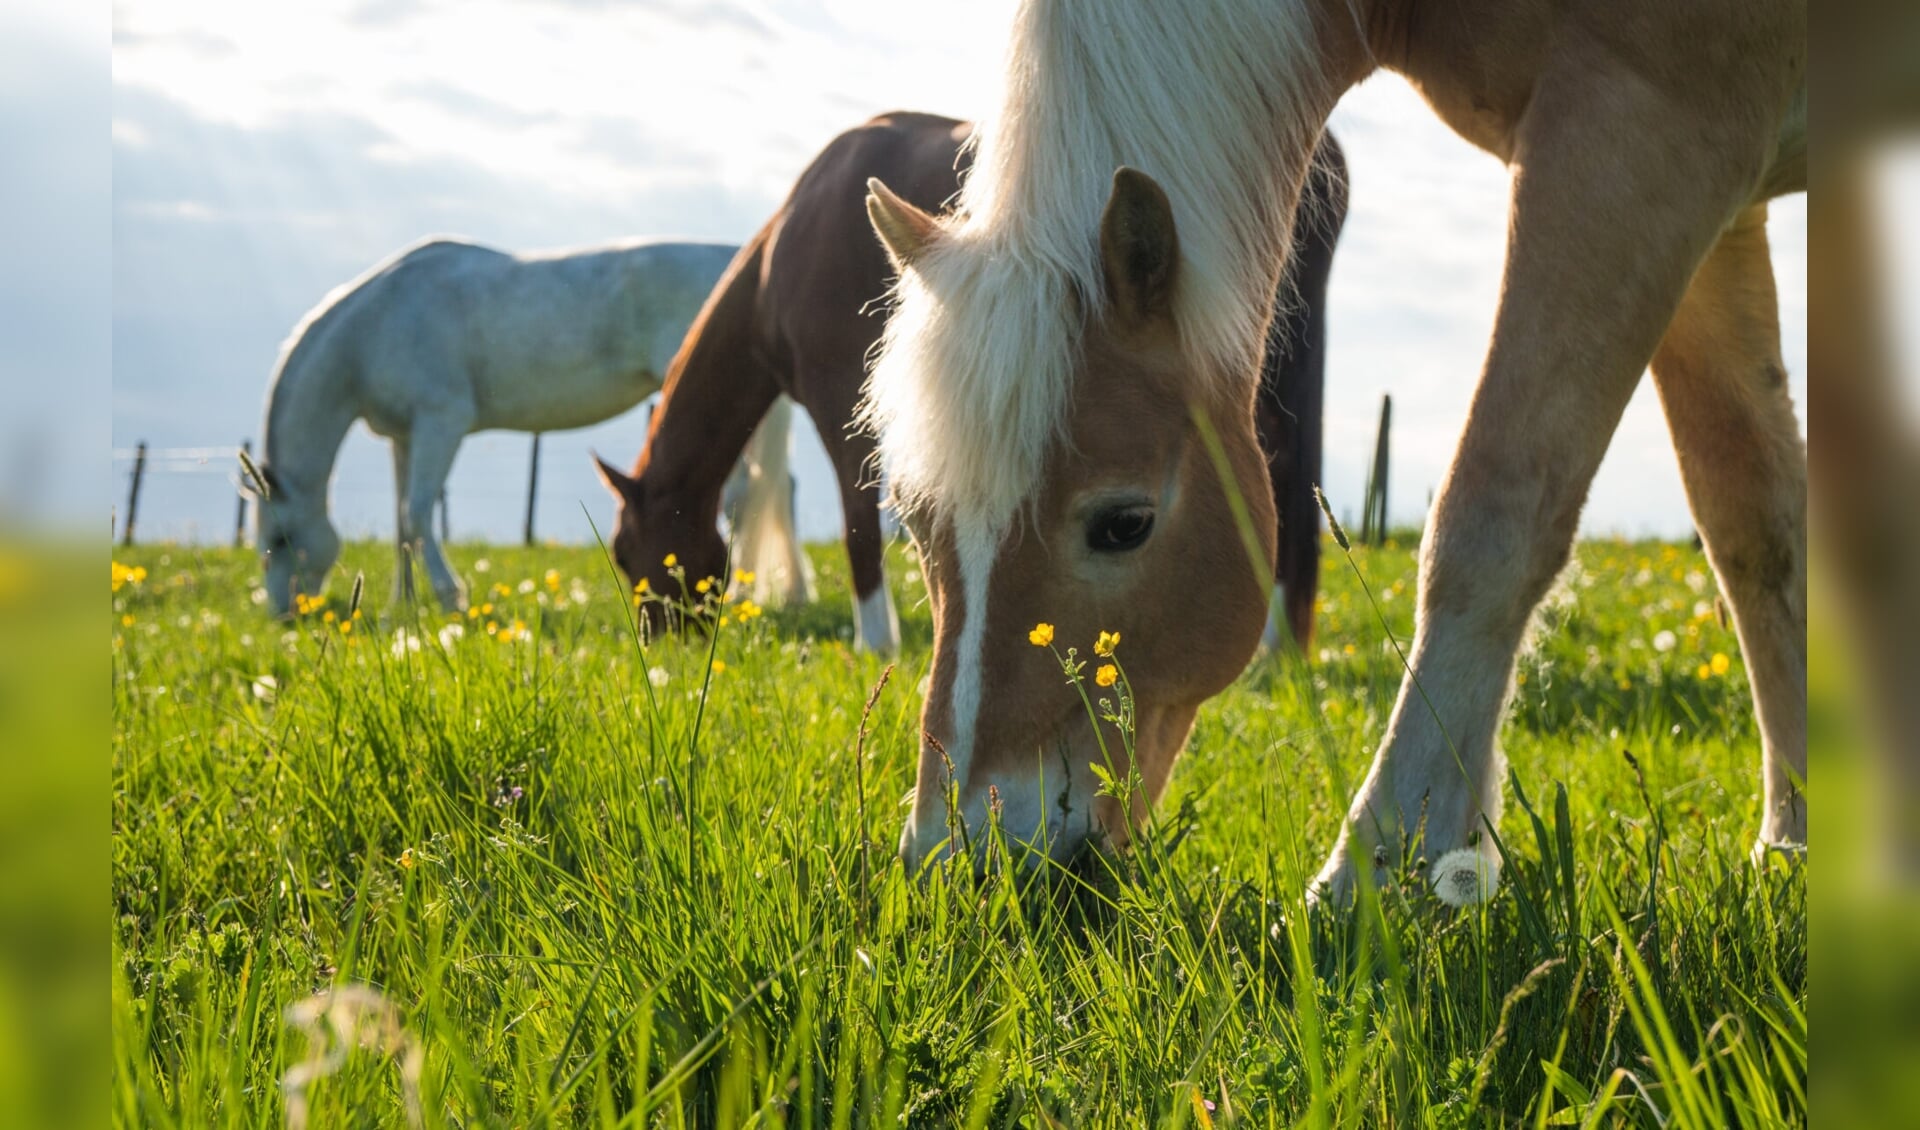 Horse,Eating,Grass,In,A,Yard,Of,A,Farm,,Beautiful